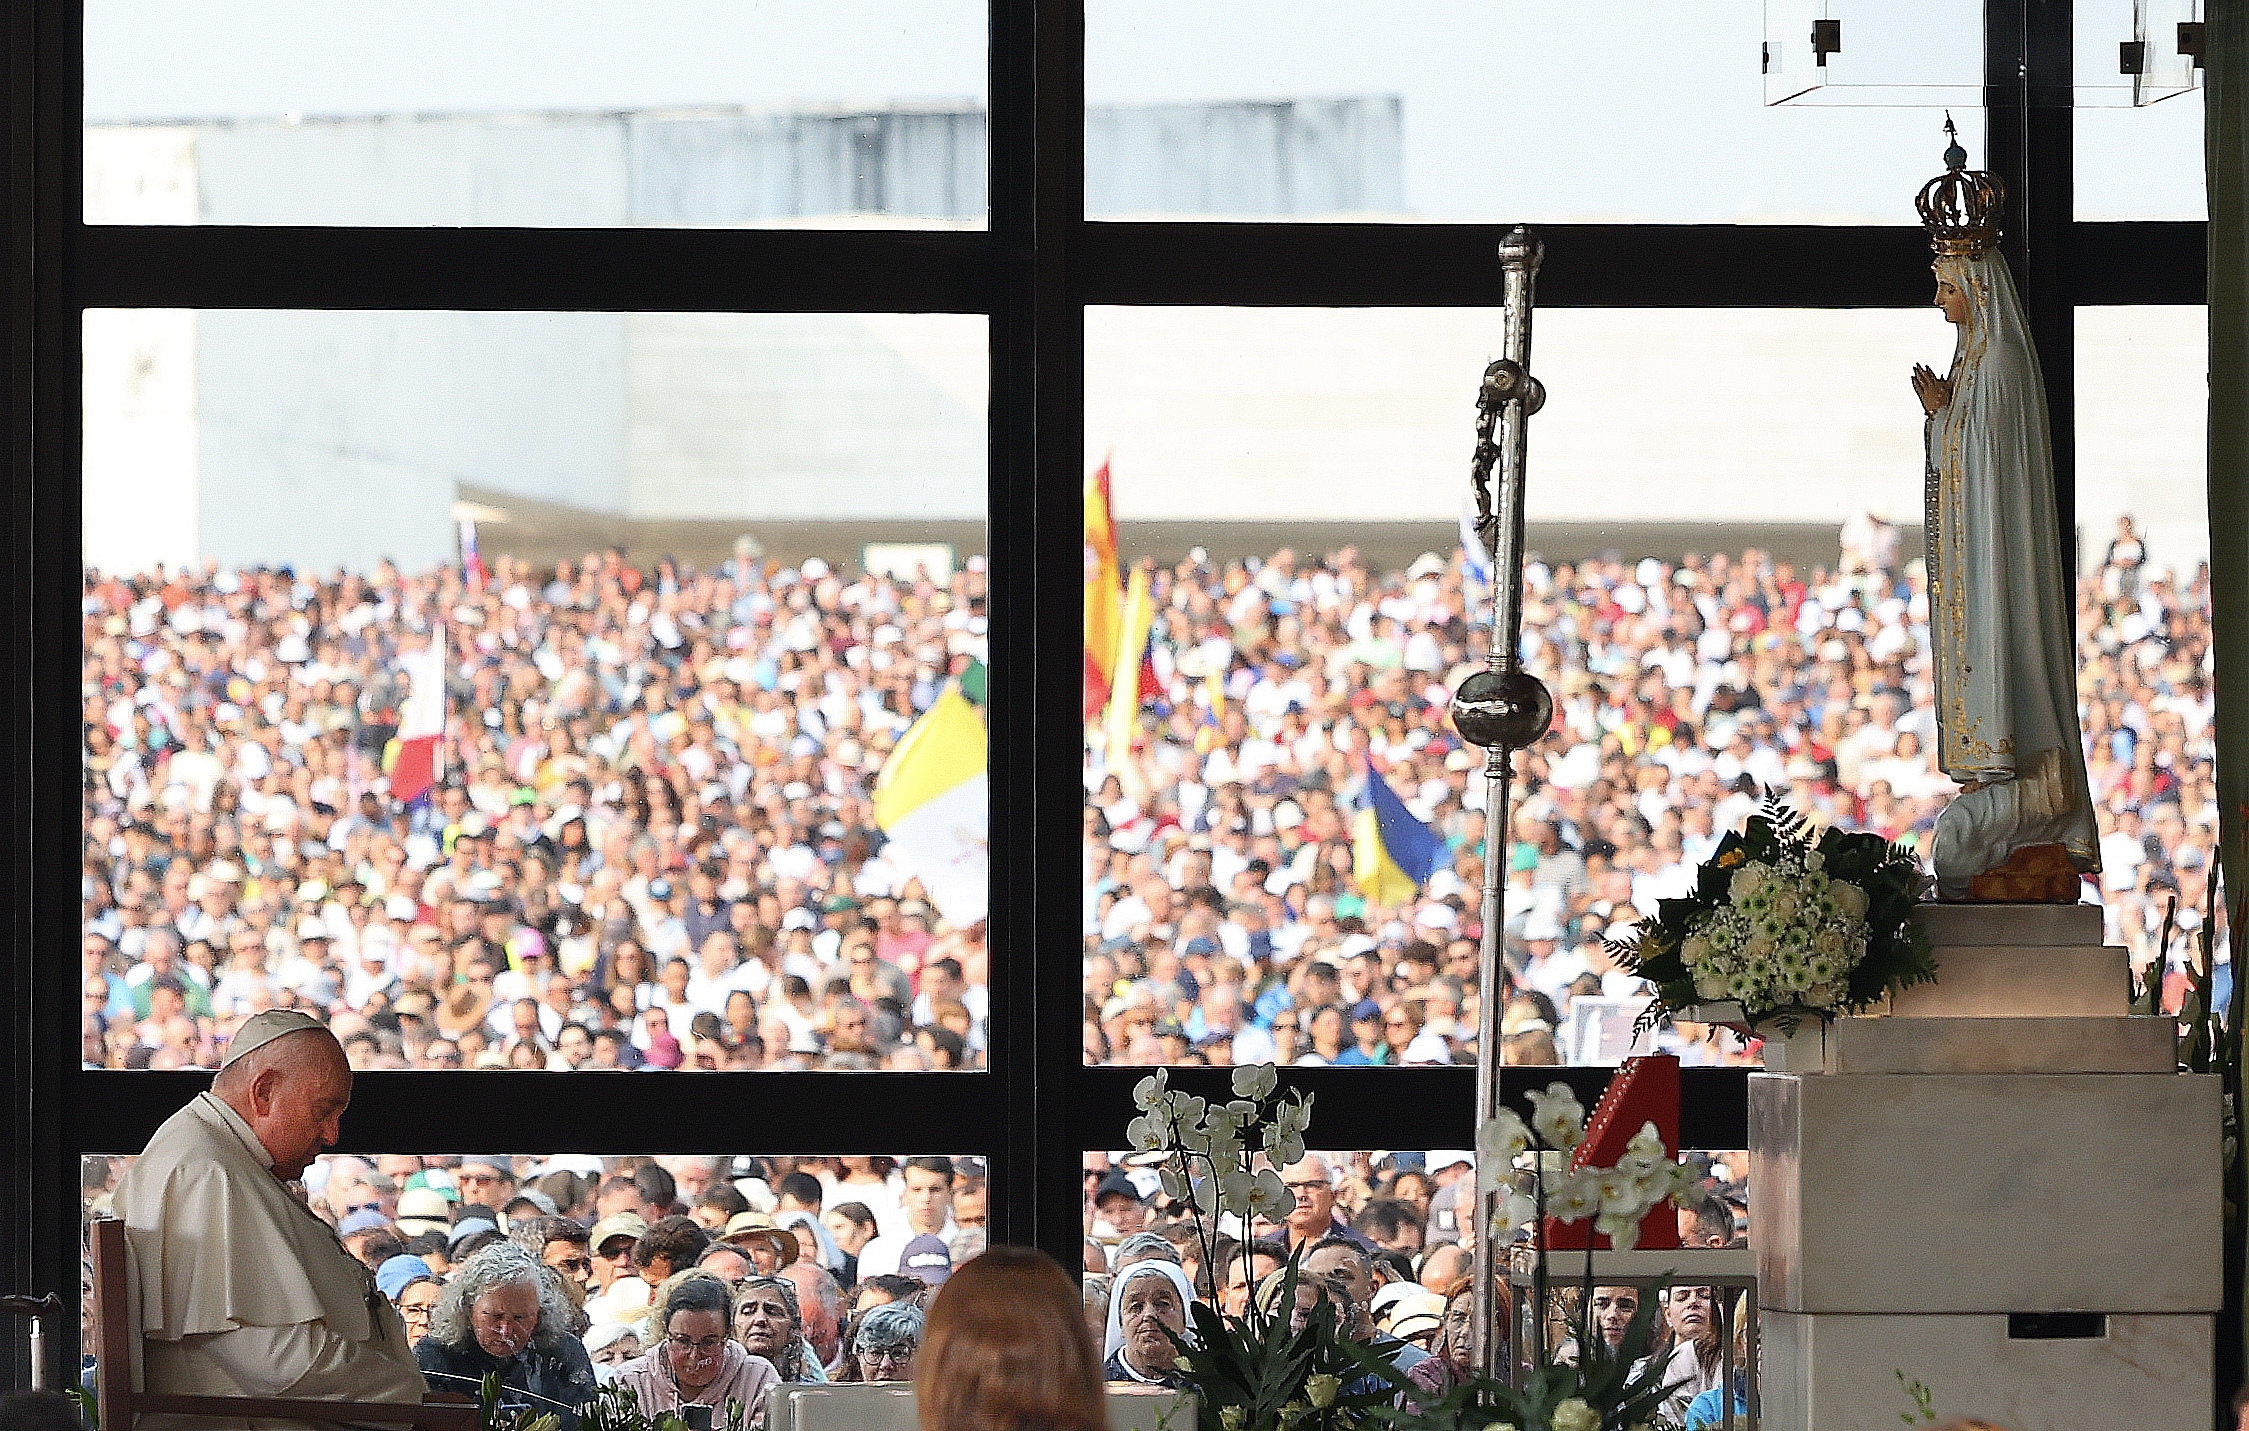 Pope Francis visits Fatima during World Youth Day